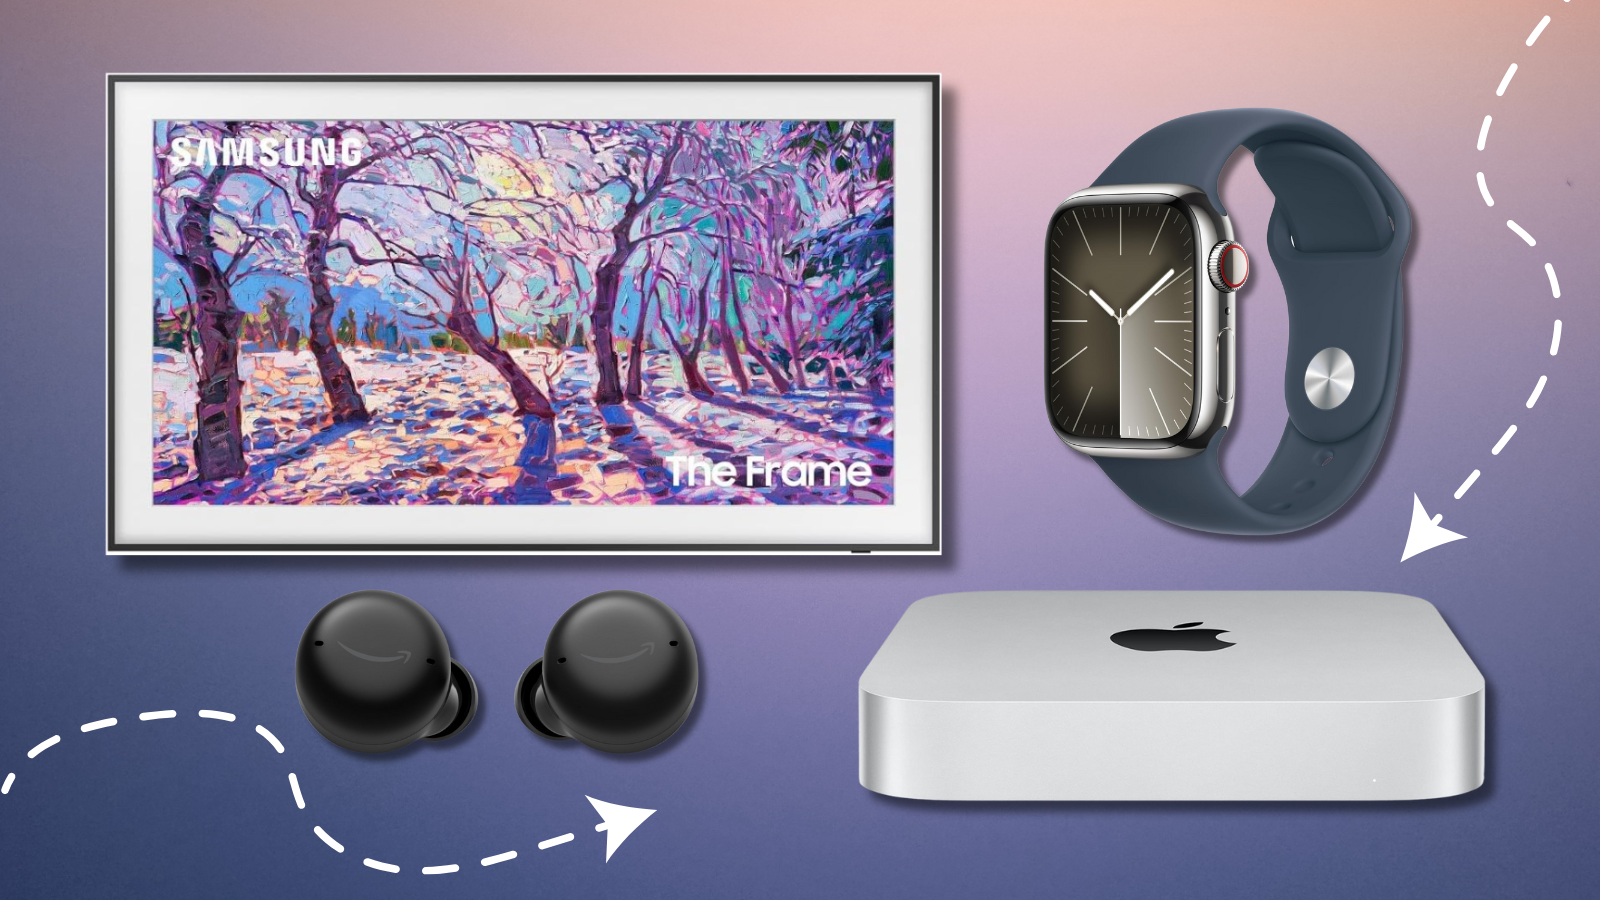 Samsung The Frame TV, Apple Watch, Amazon Echo Buds, and Mac Mini with purple gradient background